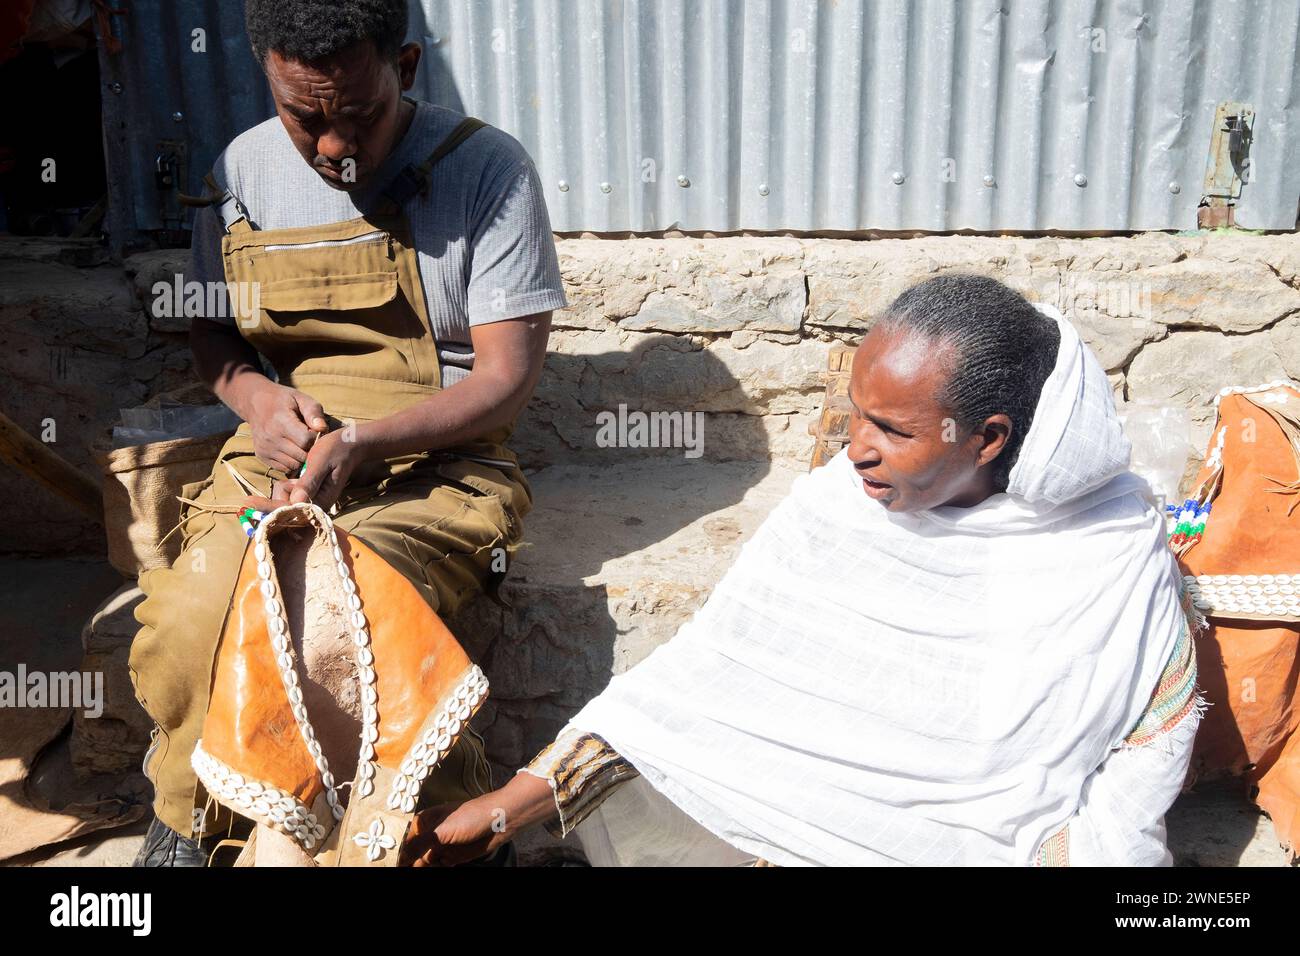 Old woman and her son sitting on the street working with leather in Ethiopia. Stock Photo